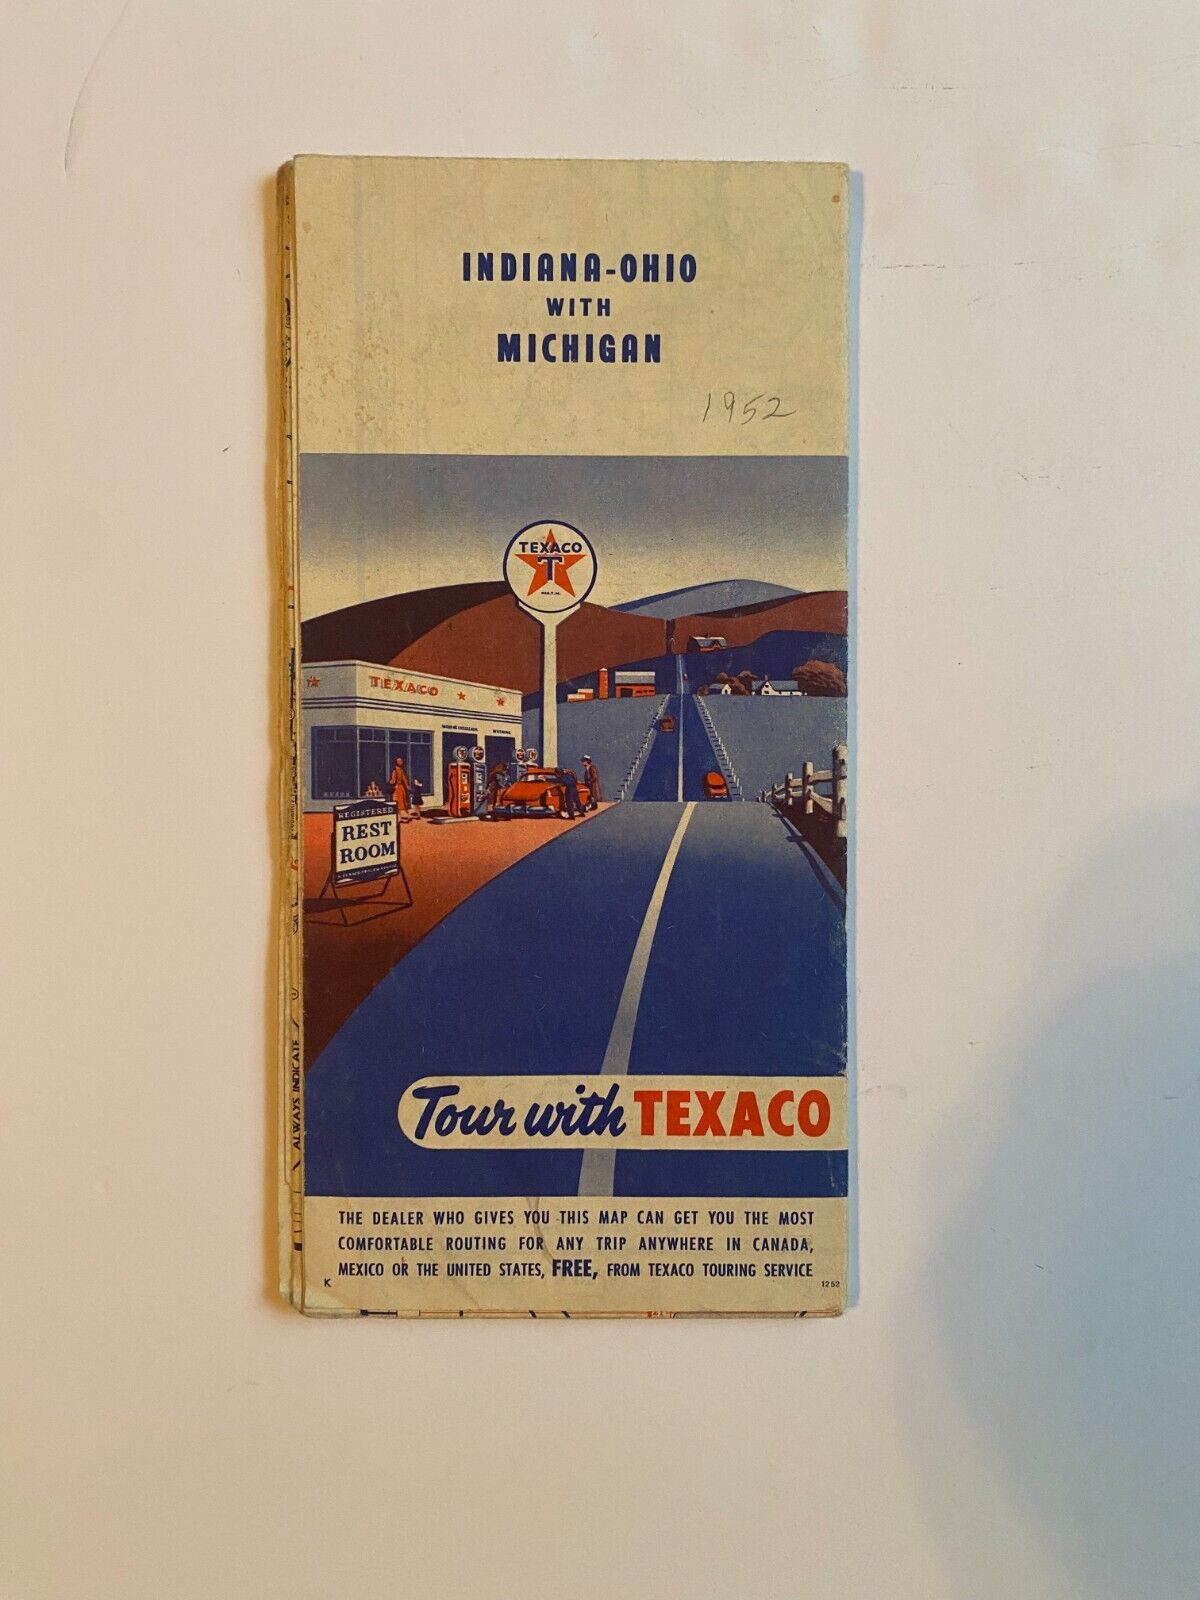 Vintage 1952 Texaco Indiana-Ohio with Michigan Gas Station Road Map GOOD COND.